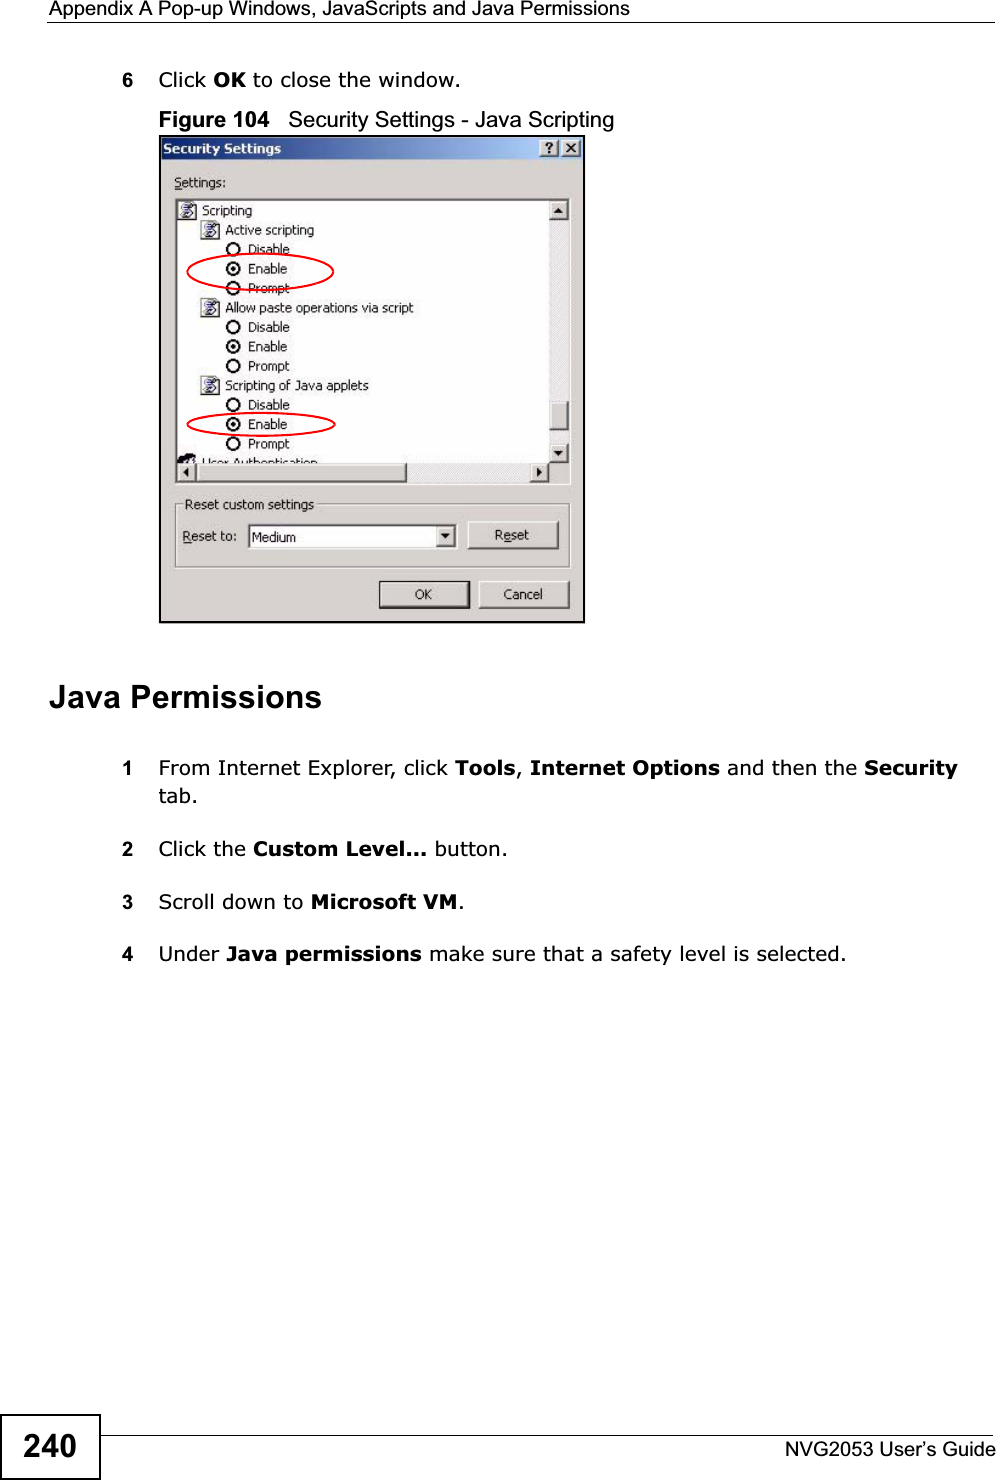 Appendix A Pop-up Windows, JavaScripts and Java PermissionsNVG2053 User’s Guide2406Click OK to close the window.Figure 104   Security Settings - Java ScriptingJava Permissions1From Internet Explorer, click Tools,Internet Options and then the Securitytab. 2Click the Custom Level... button. 3Scroll down to Microsoft VM.4Under Java permissions make sure that a safety level is selected.